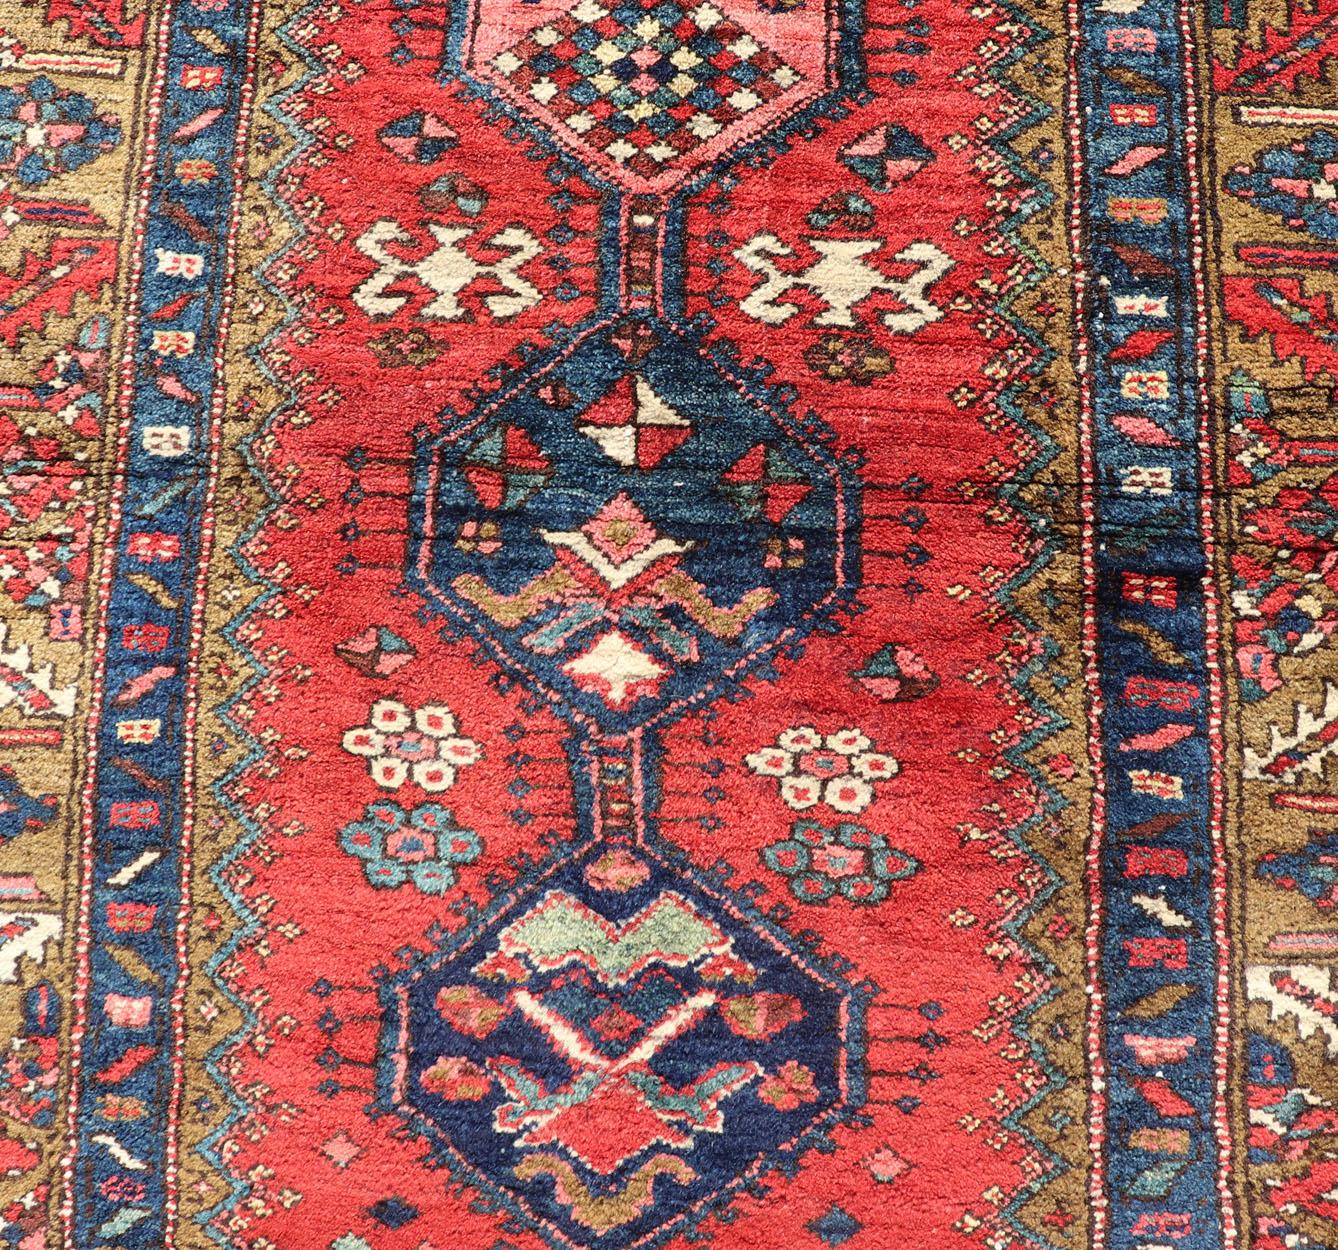 Antique Persian Heriz Runner in Reds, Blues, Pink, Ivory and Earthy Tones For Sale 2